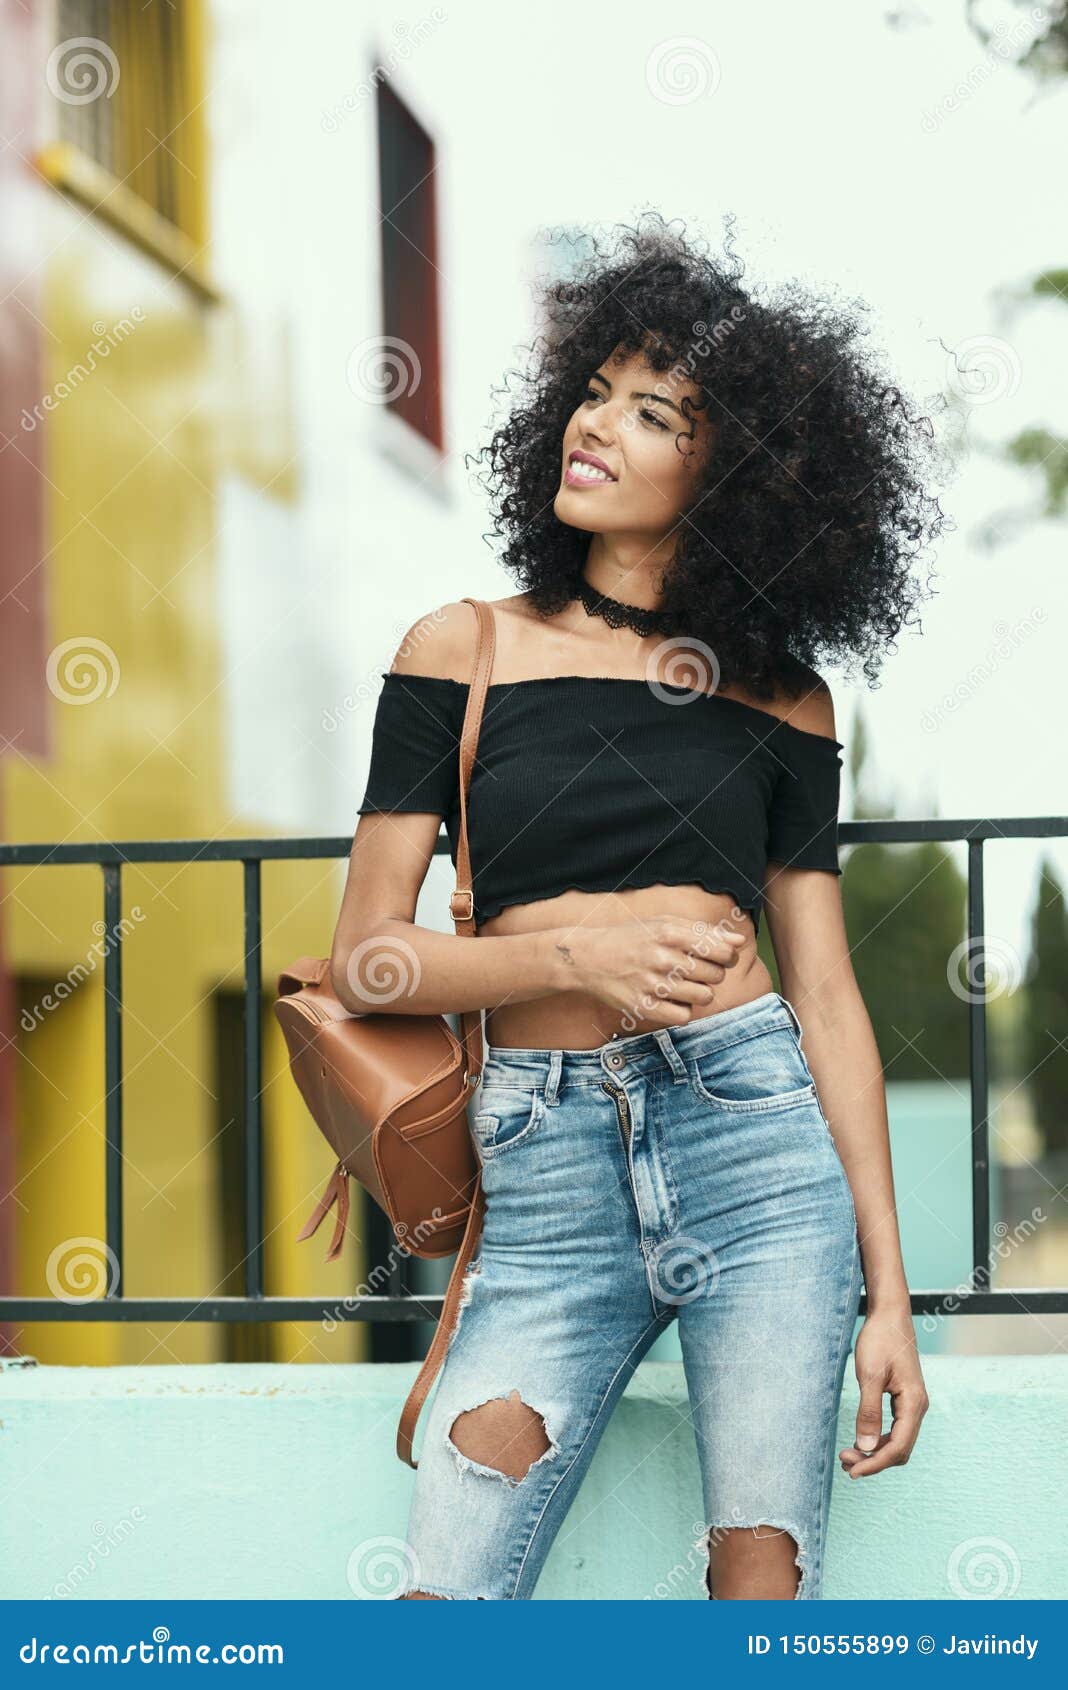 Smiling Mixed Woman with Afro Hair Standing on the Street Stock Image ...